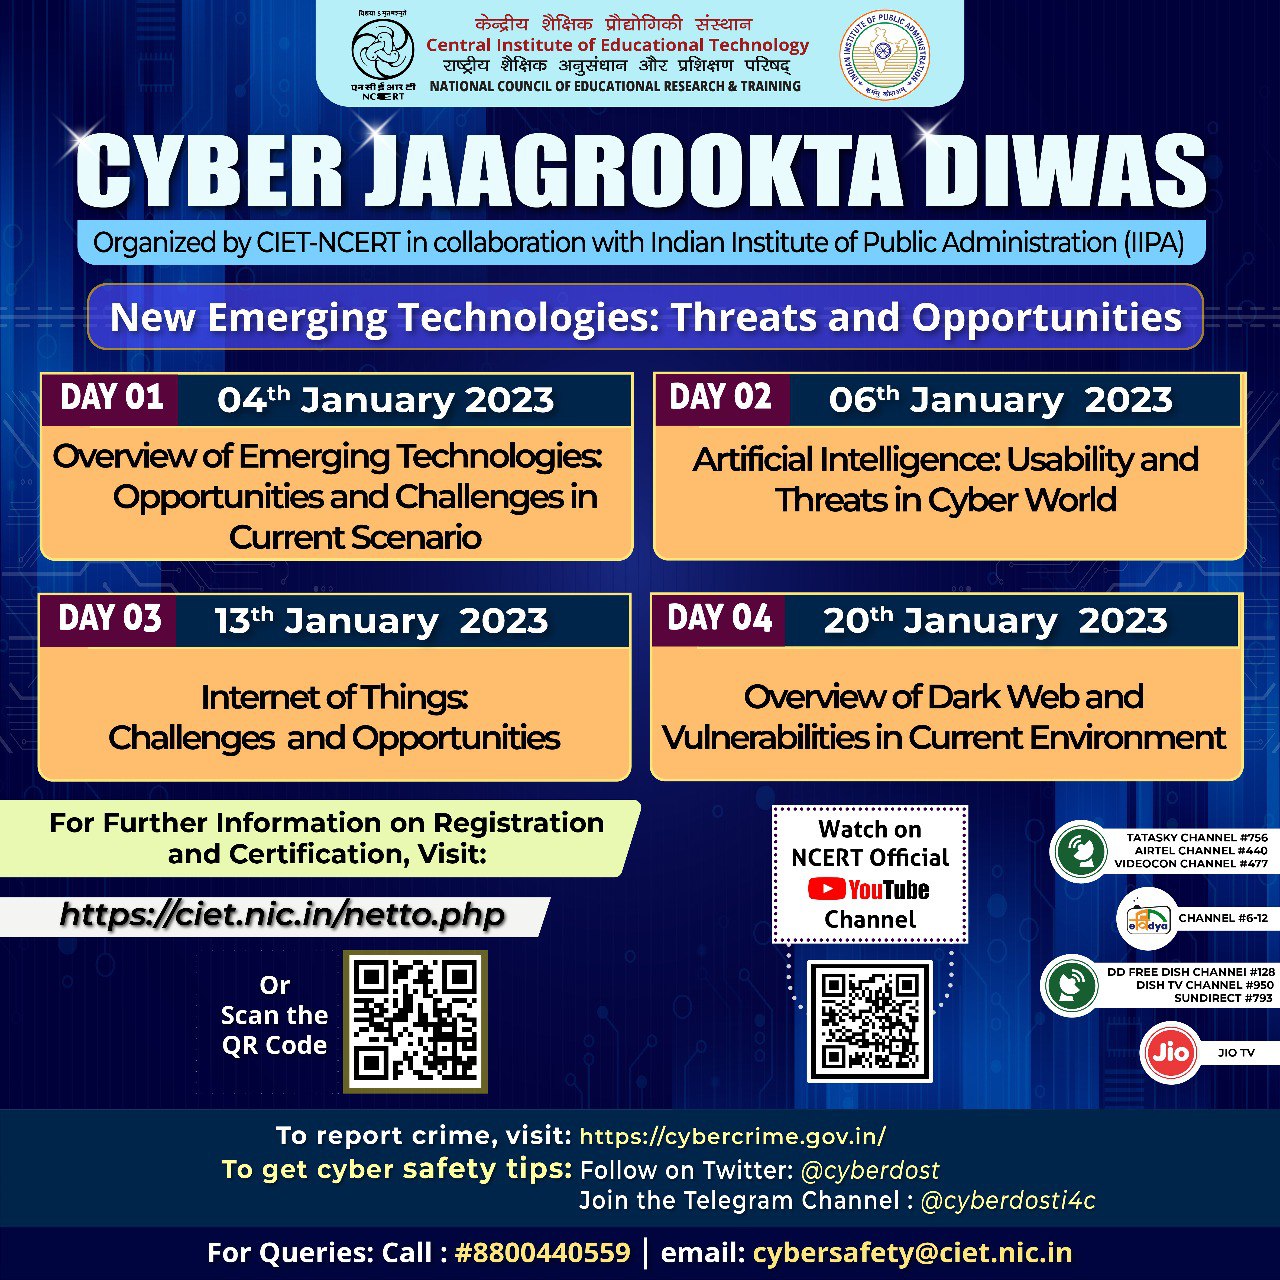 Cyber Jaagrookta Diwas : New Emerging Technologies - Threats and Opportunities Image